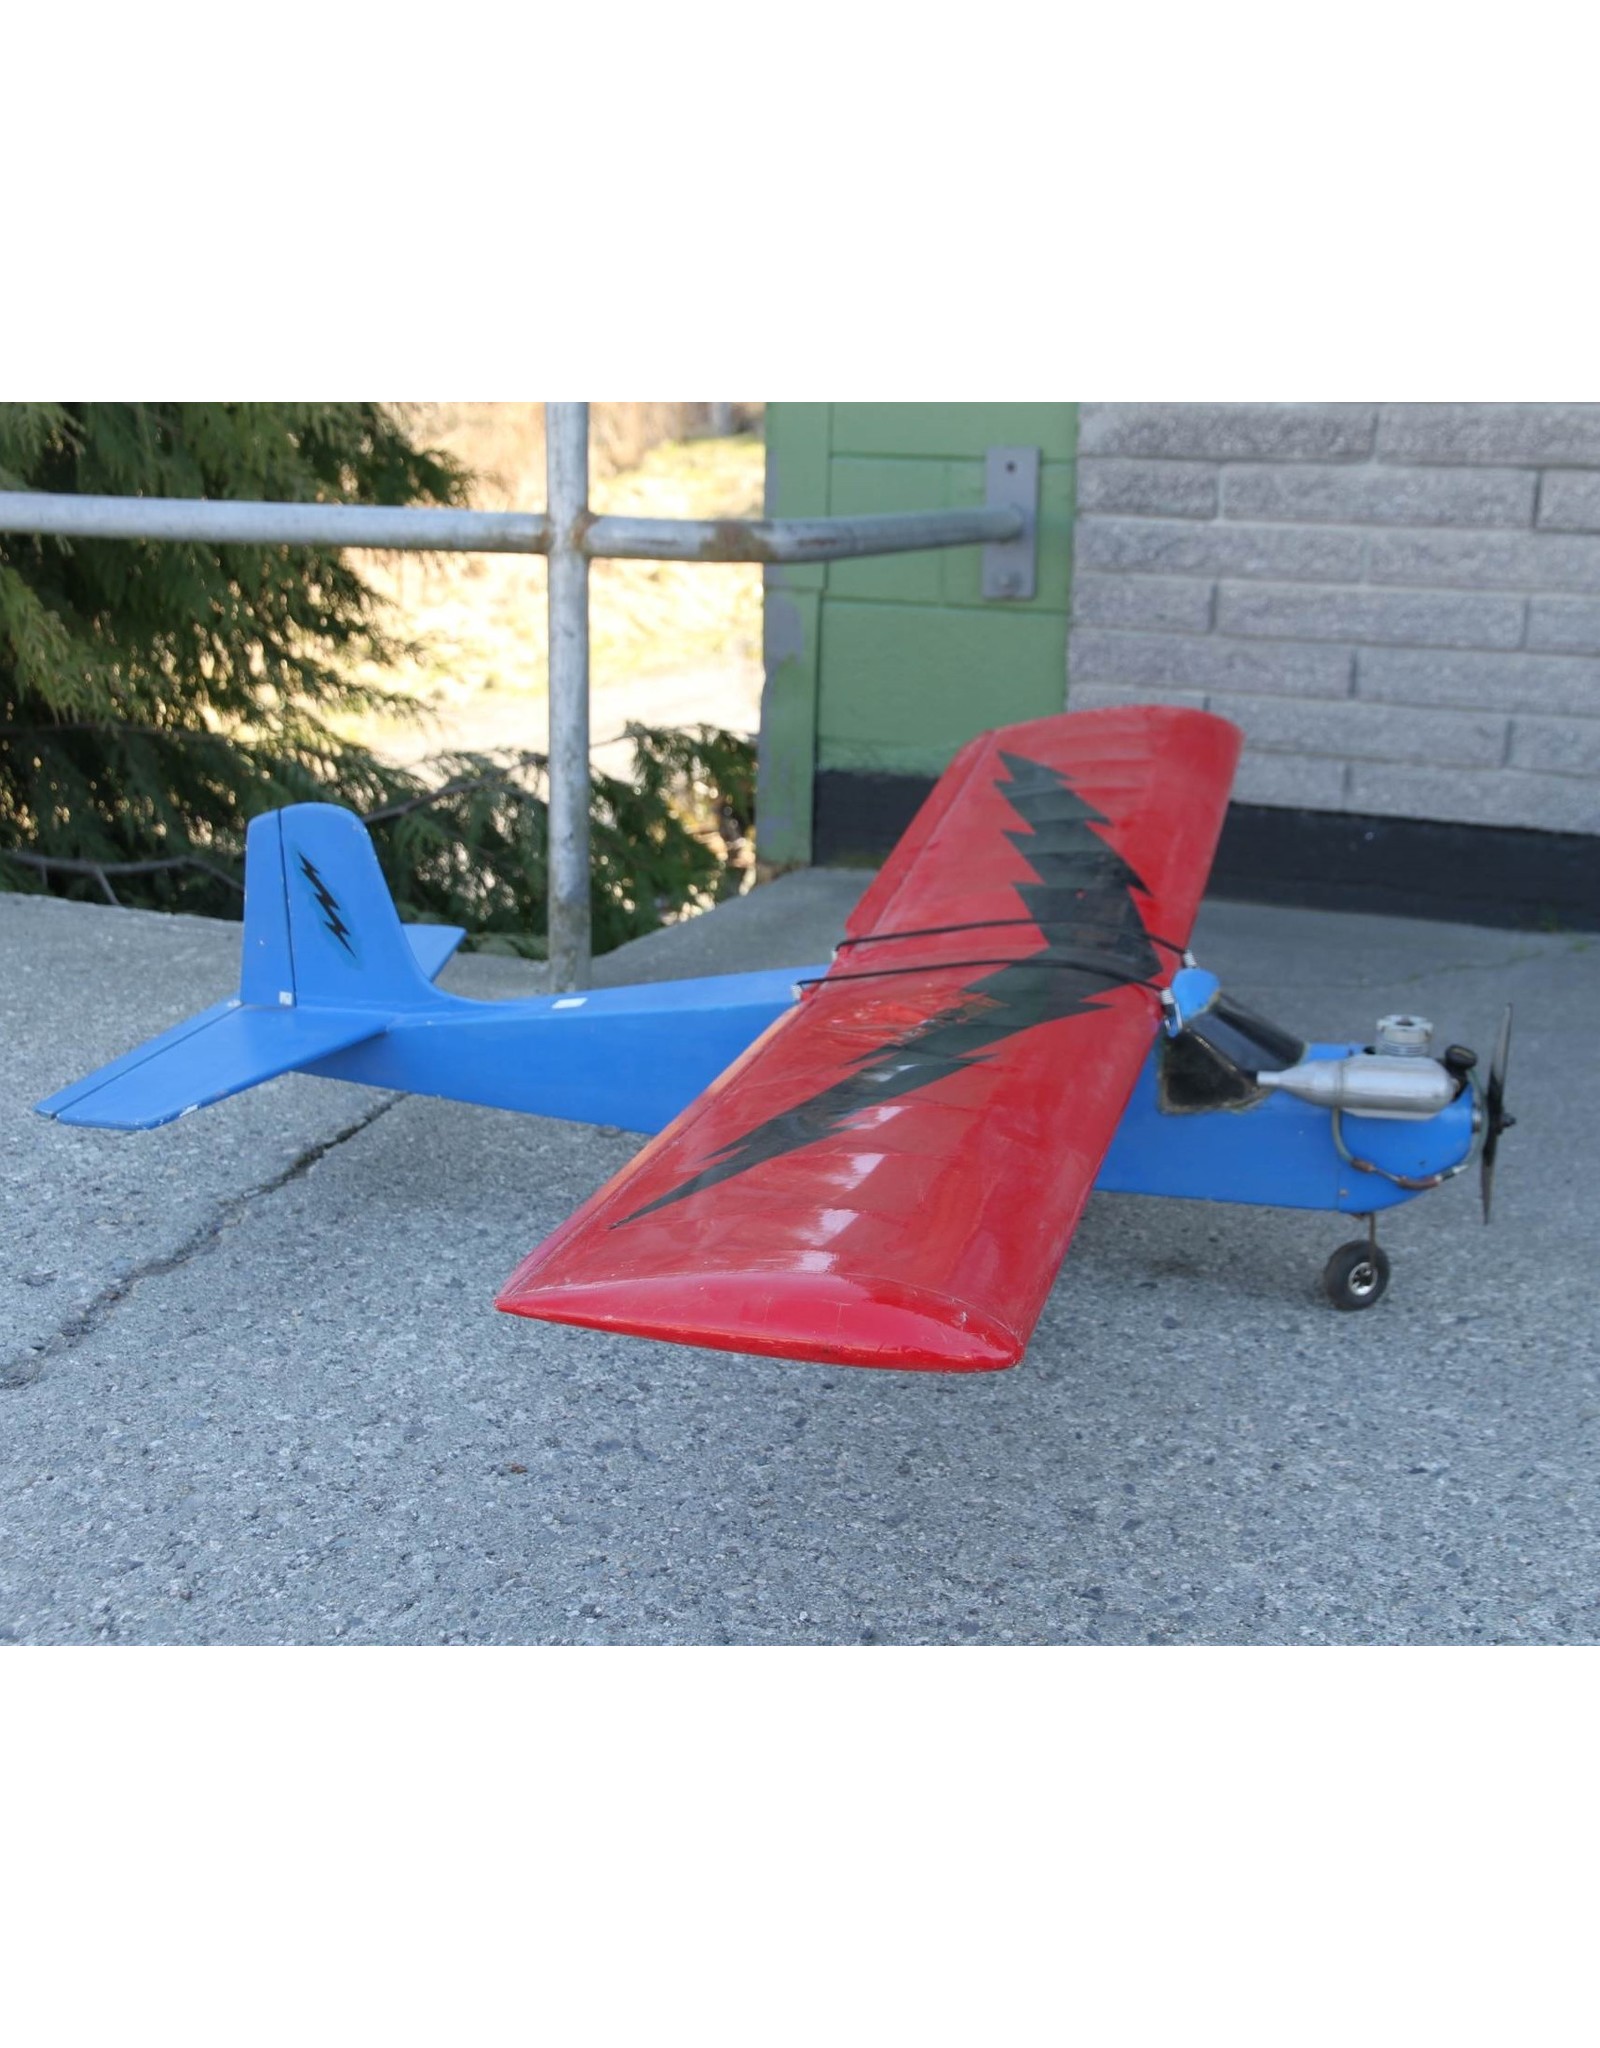 Plane - radio controlled, no controller, red and blue